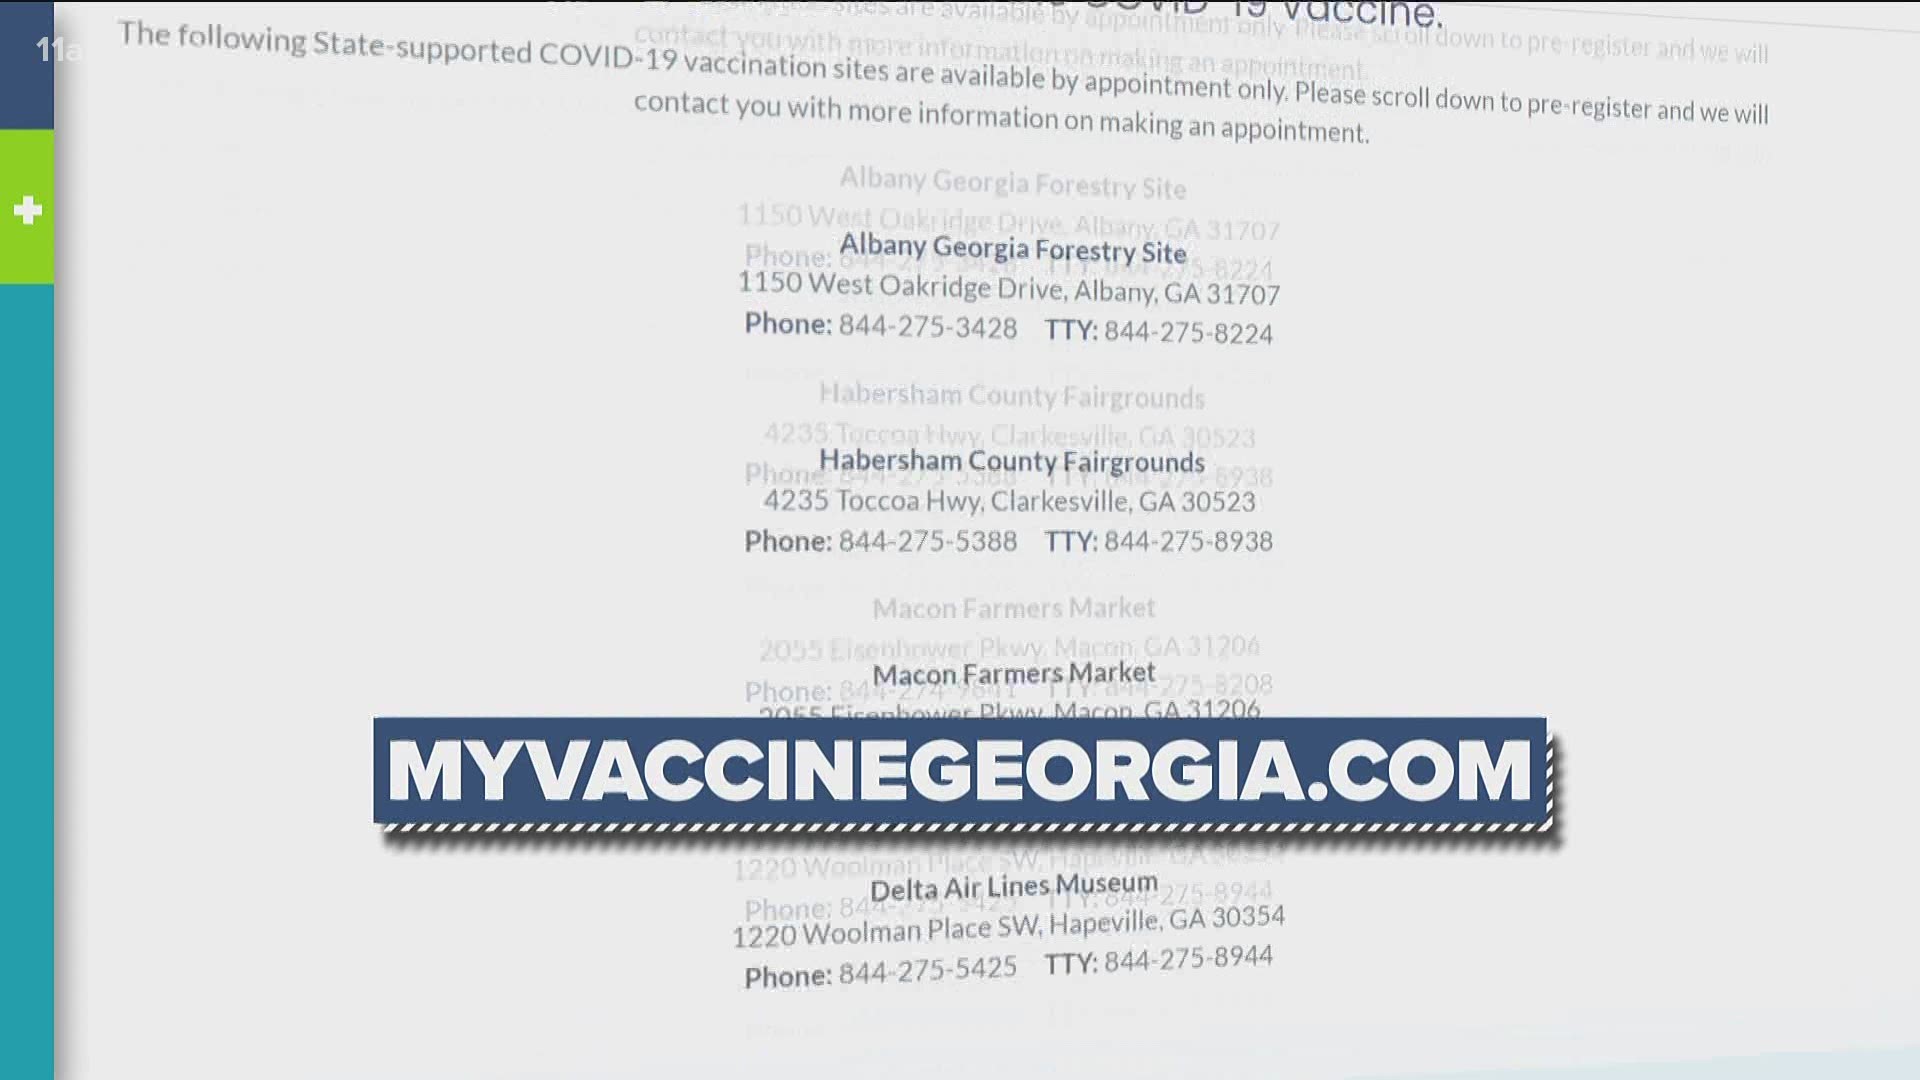 The site is MyVaccineGeorgia.com.